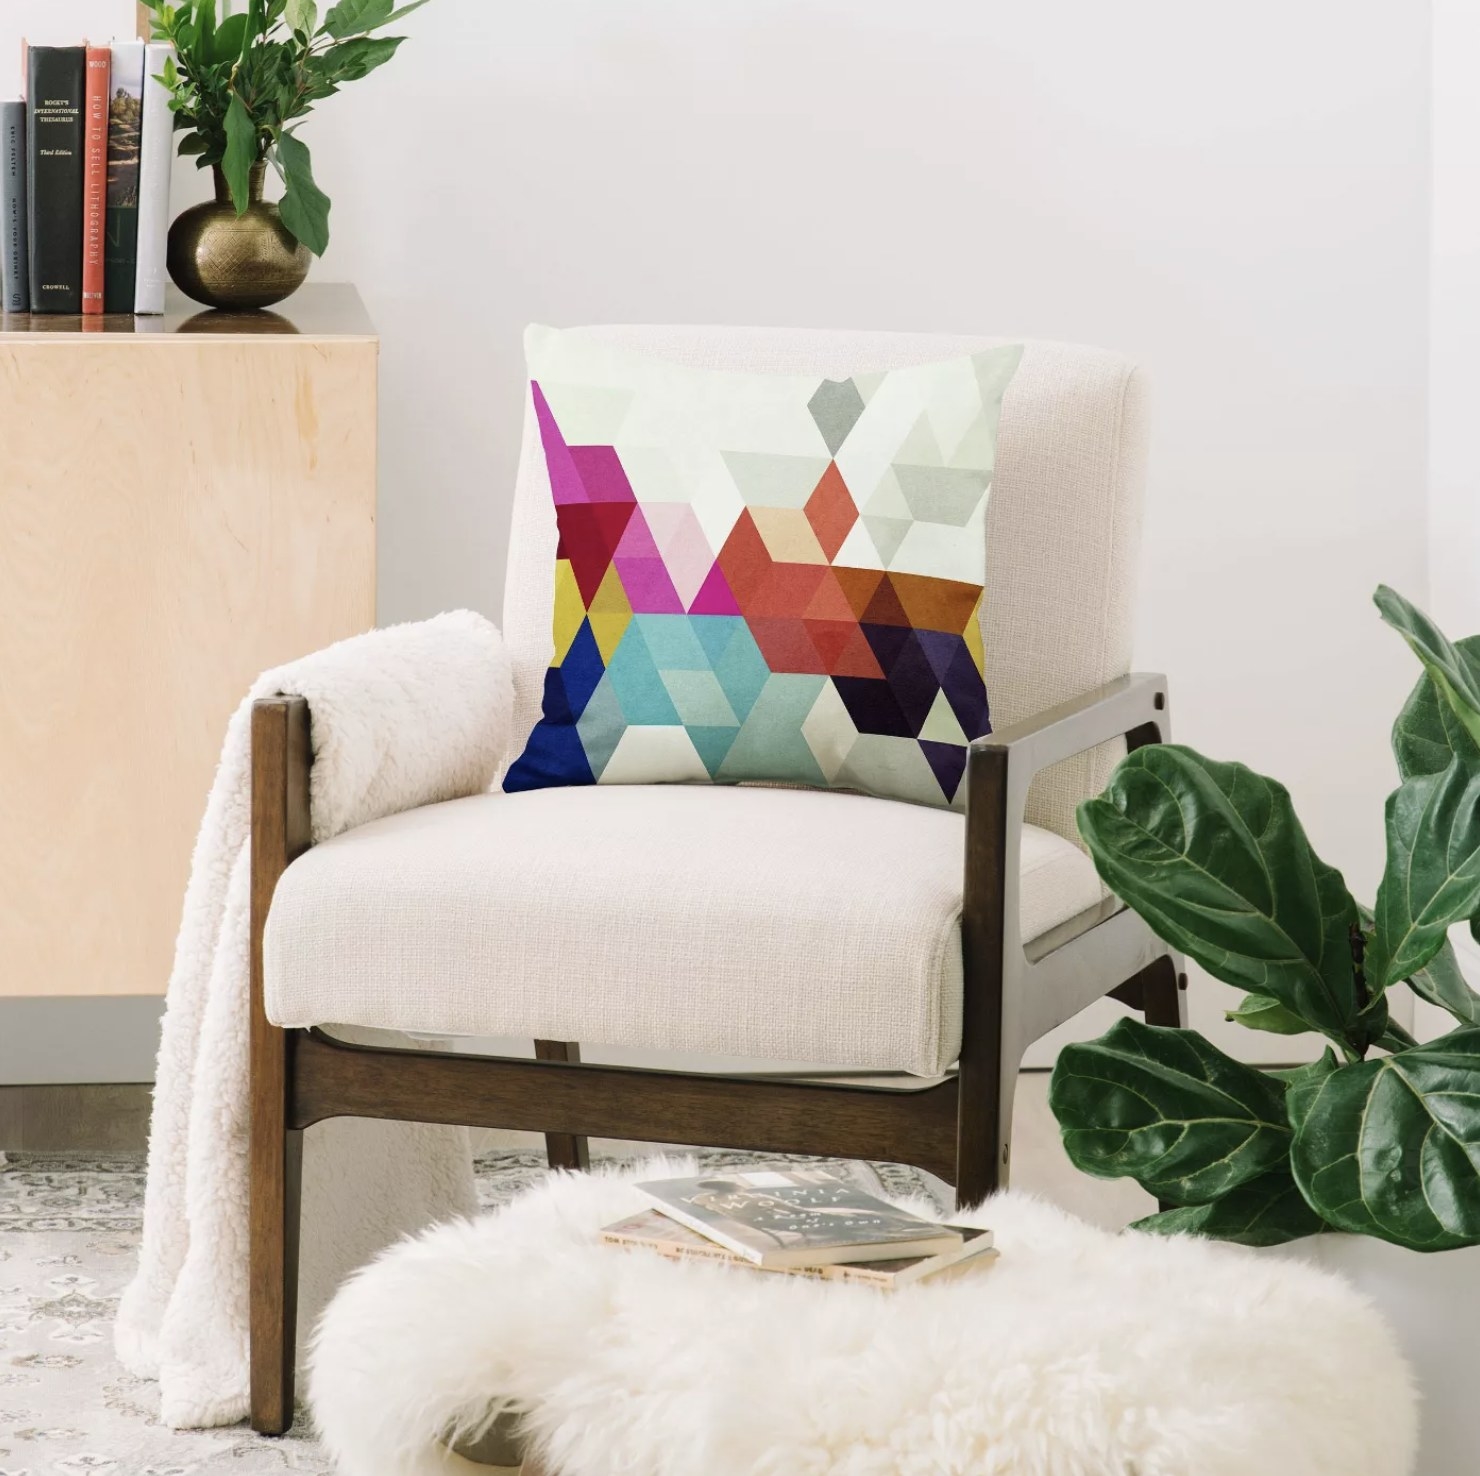 A geometric patterned throw pillow on a chair in a living room